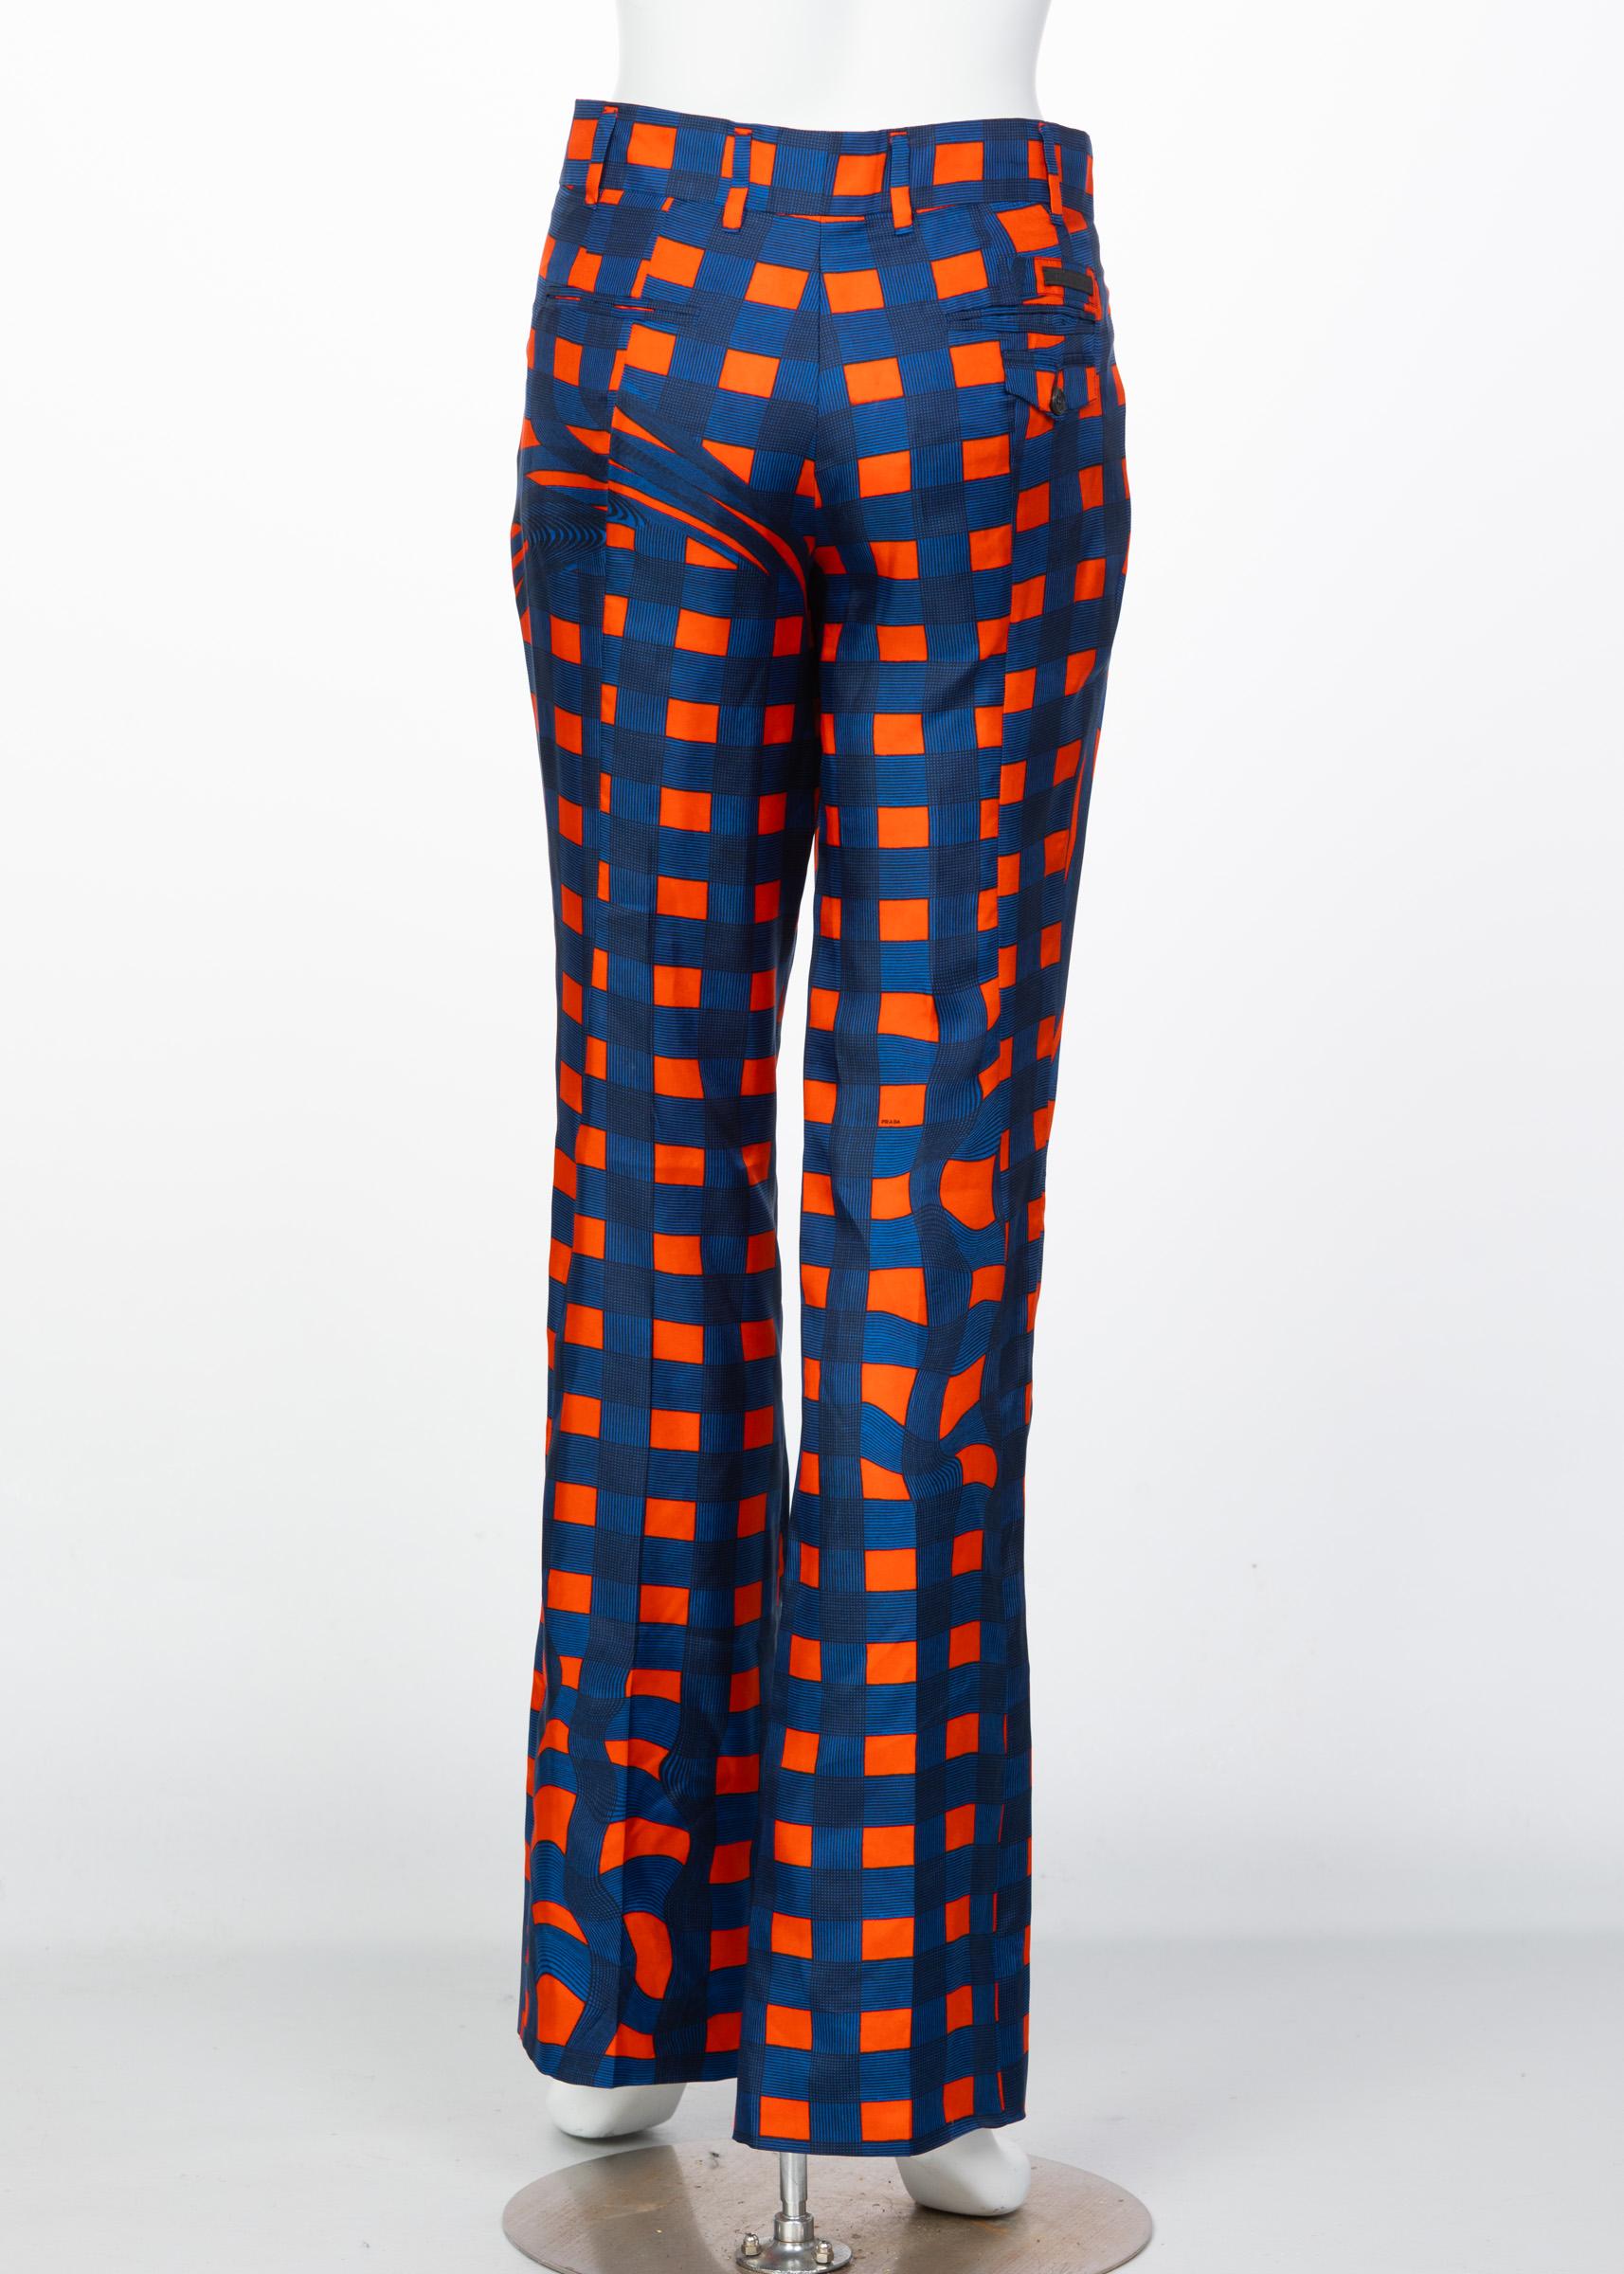 Prada Blue Orange Red Check Silk Fairy Pants Runway, 2008 In Excellent Condition For Sale In Boca Raton, FL